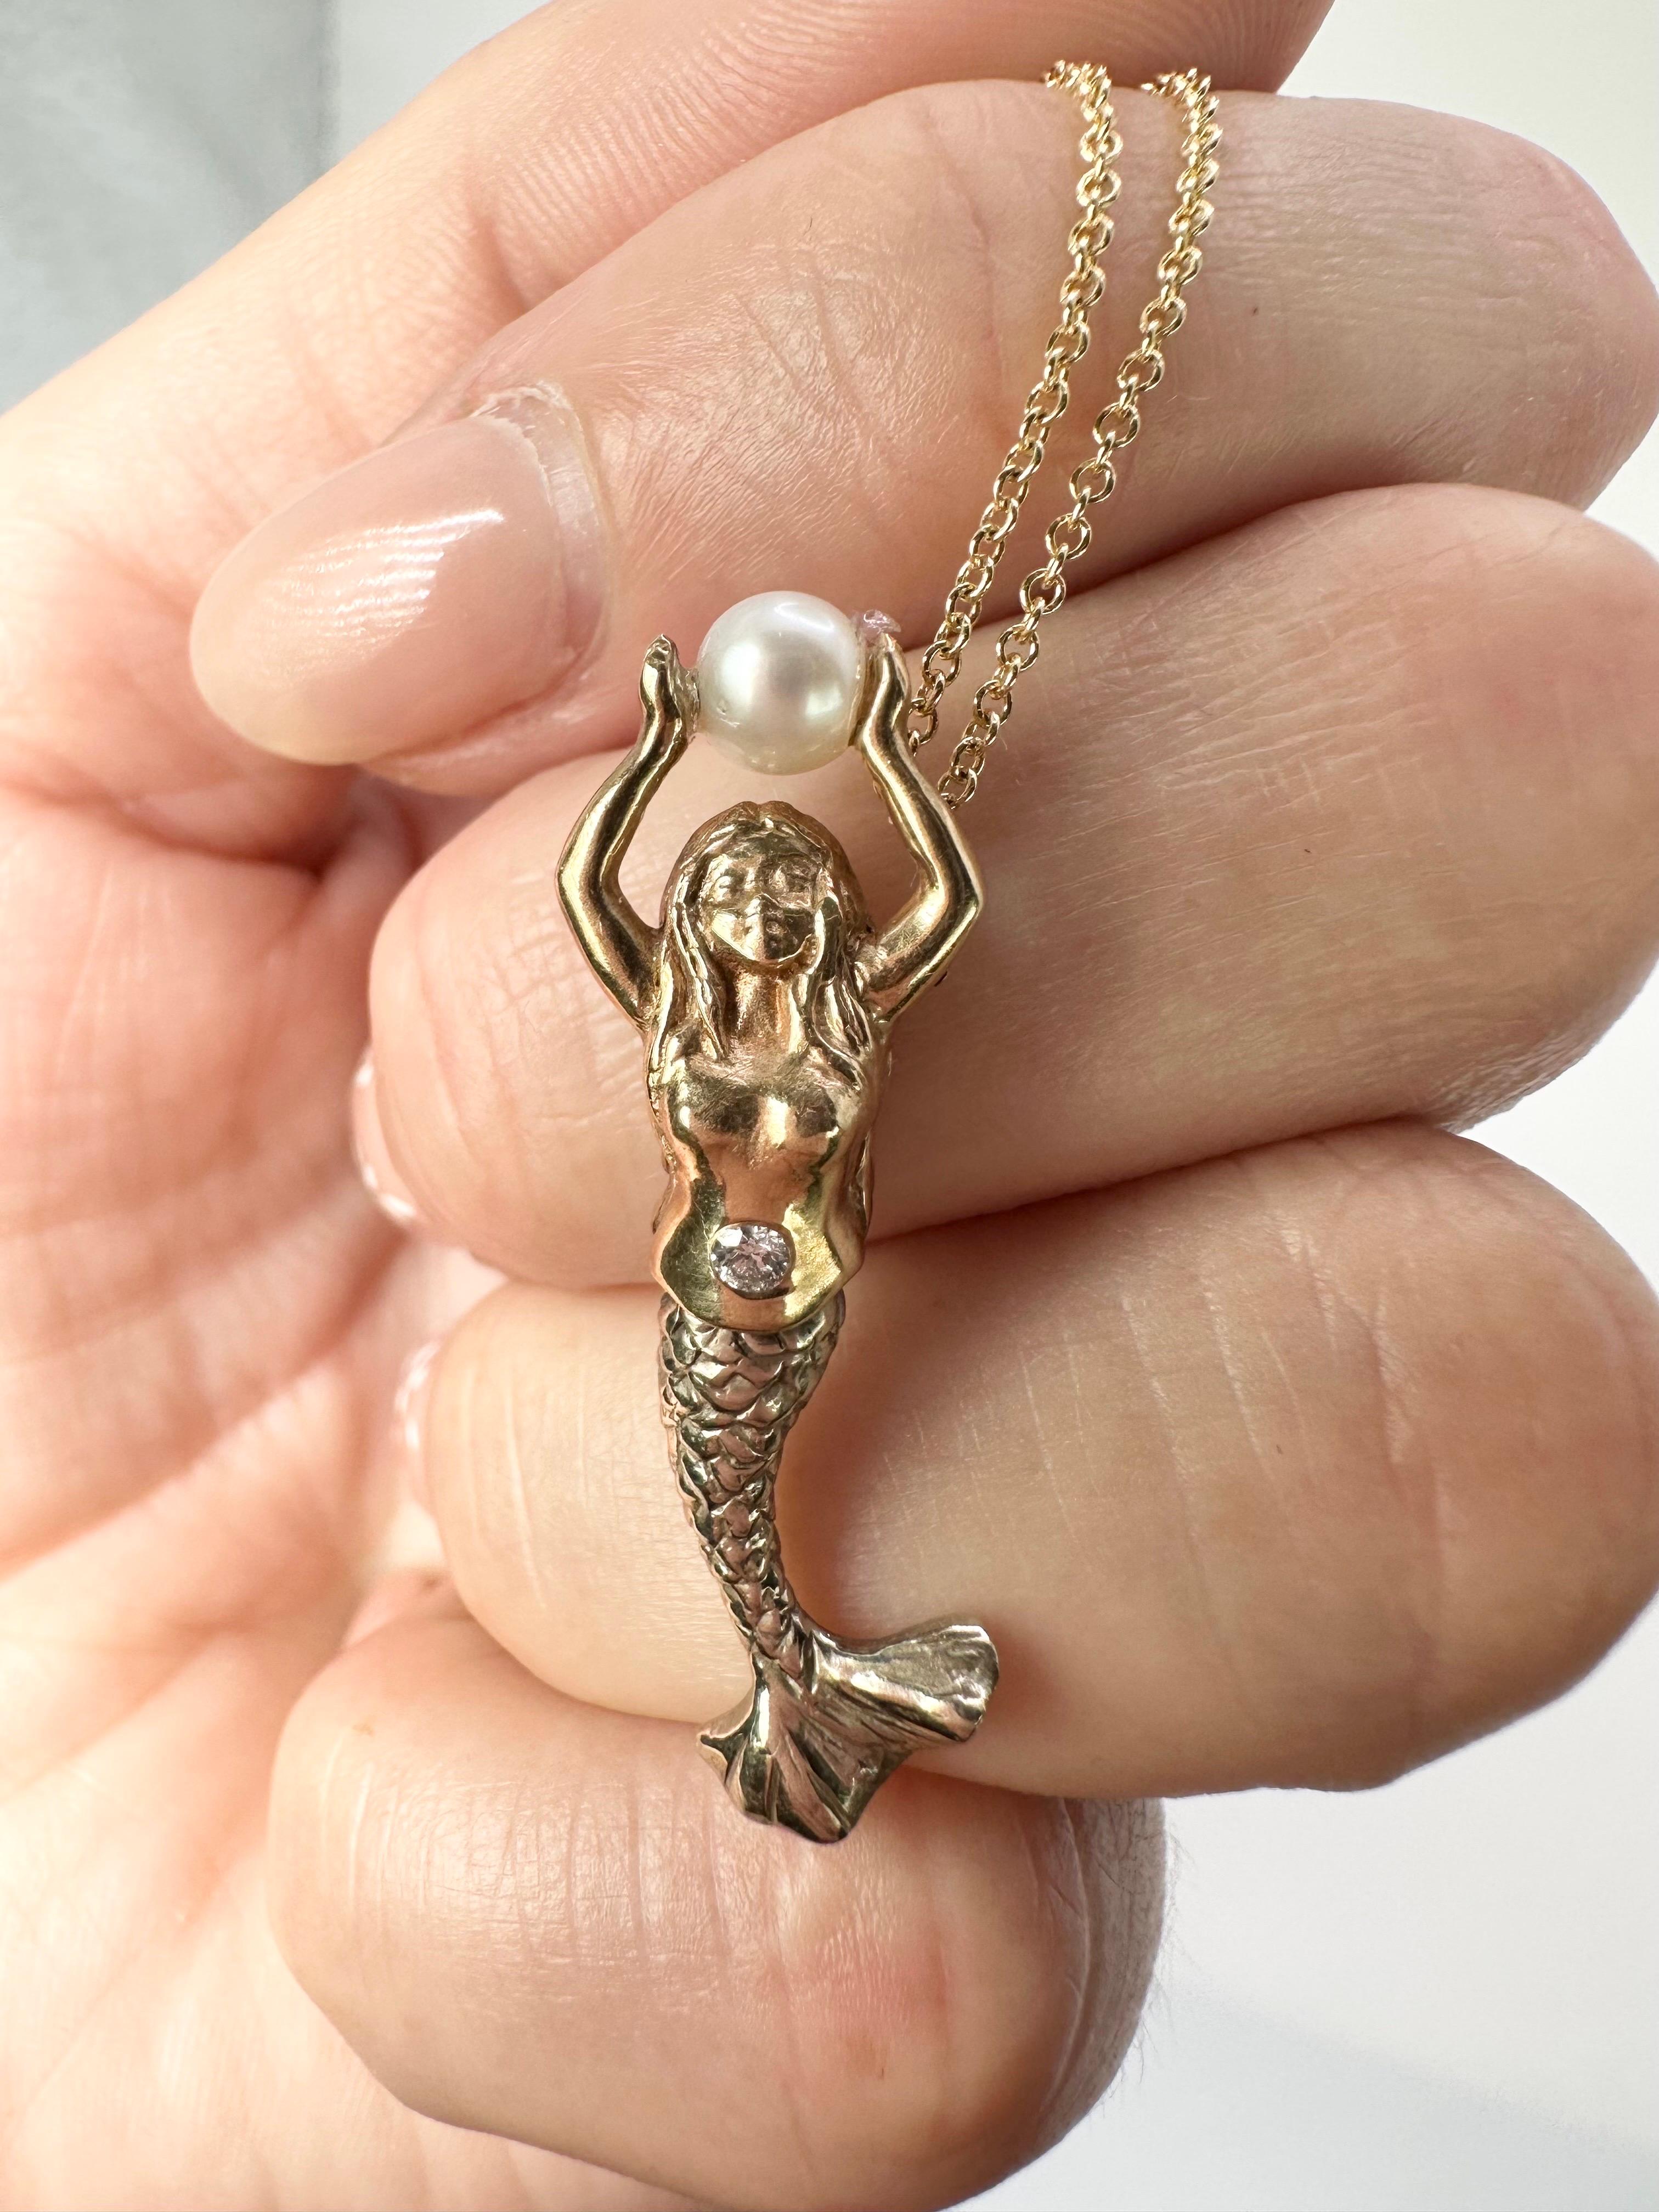 Mermaid Pearl Pendant Necklace Unique Hand Engraved Pendant 14kt Yellow Gold For Sale 1